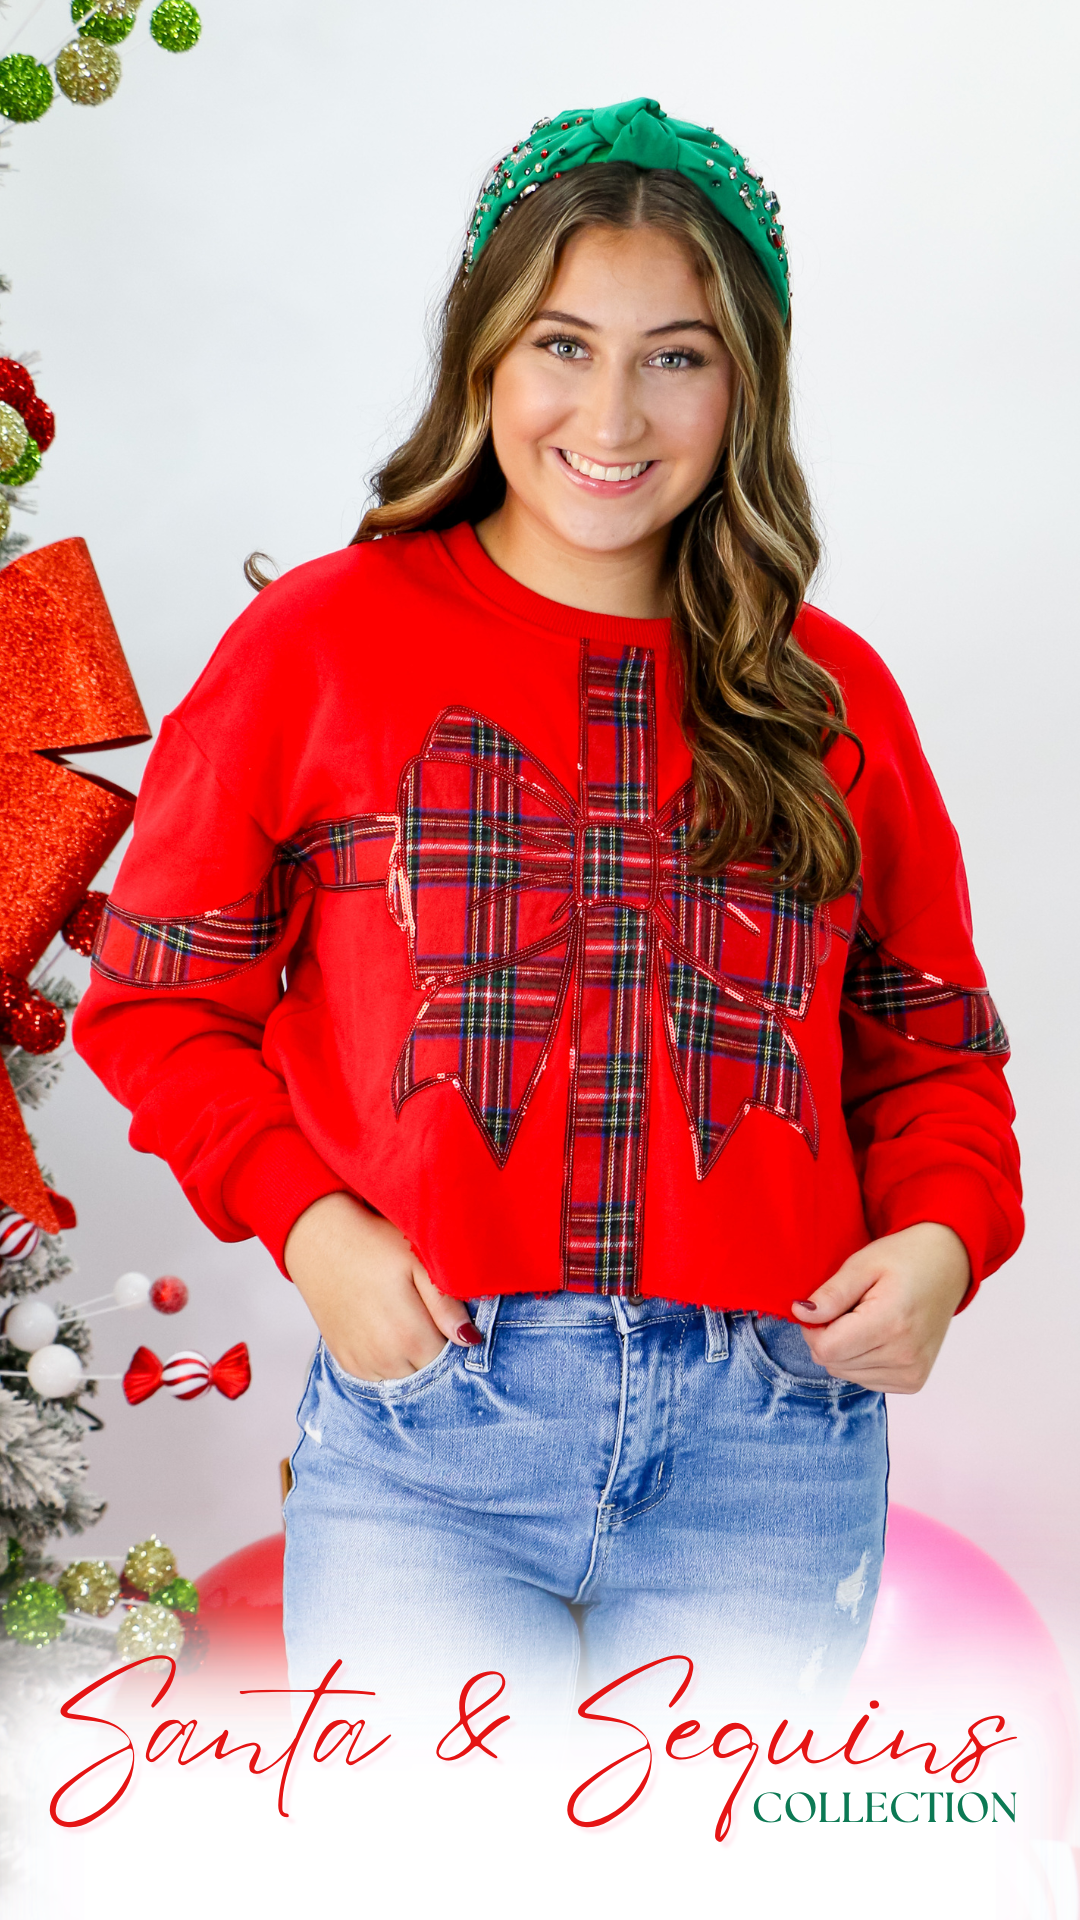 Festive :: Red, Green, and Sequins, cute & little